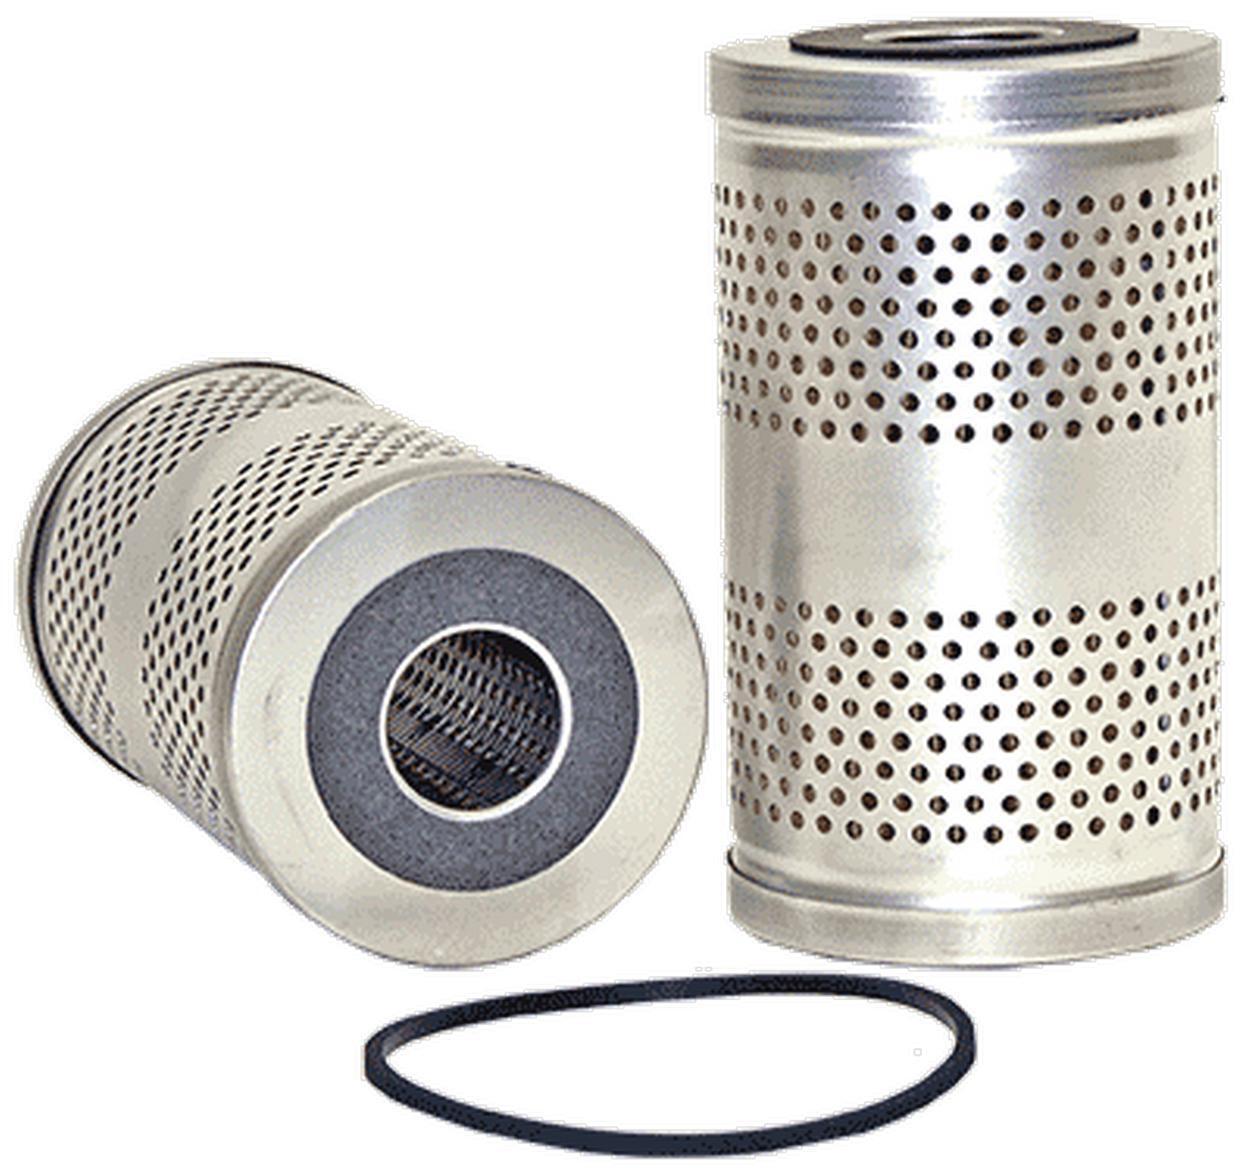 Wix 51123 WIX Cartridge Lube Metal Canister Filter